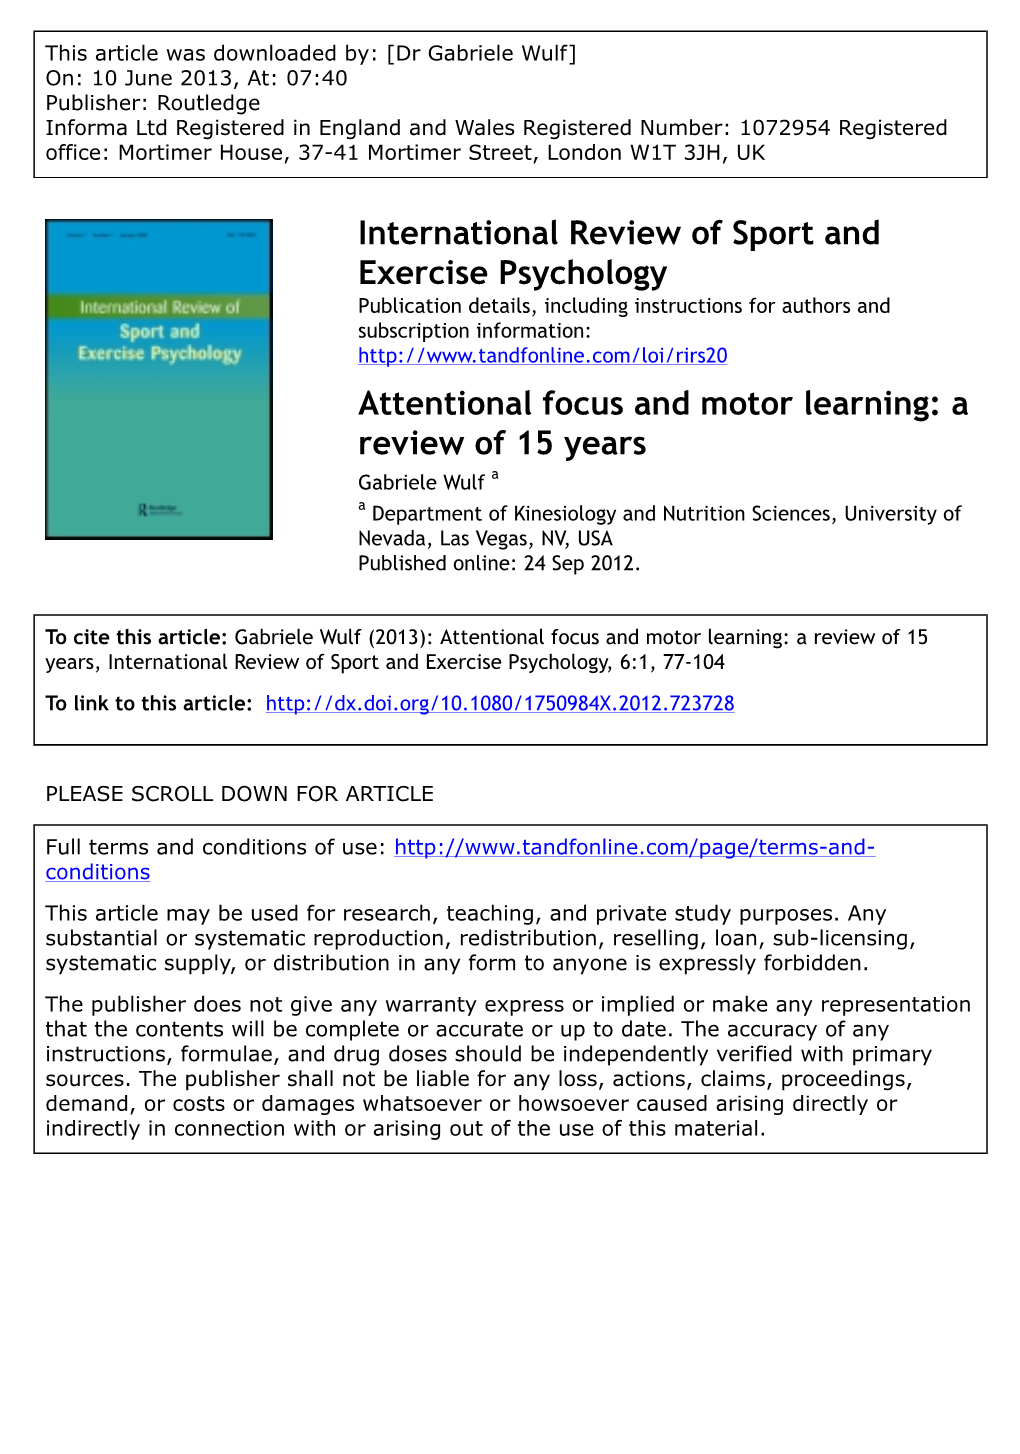 Attentional Focus and Motor Learning: a Review Of